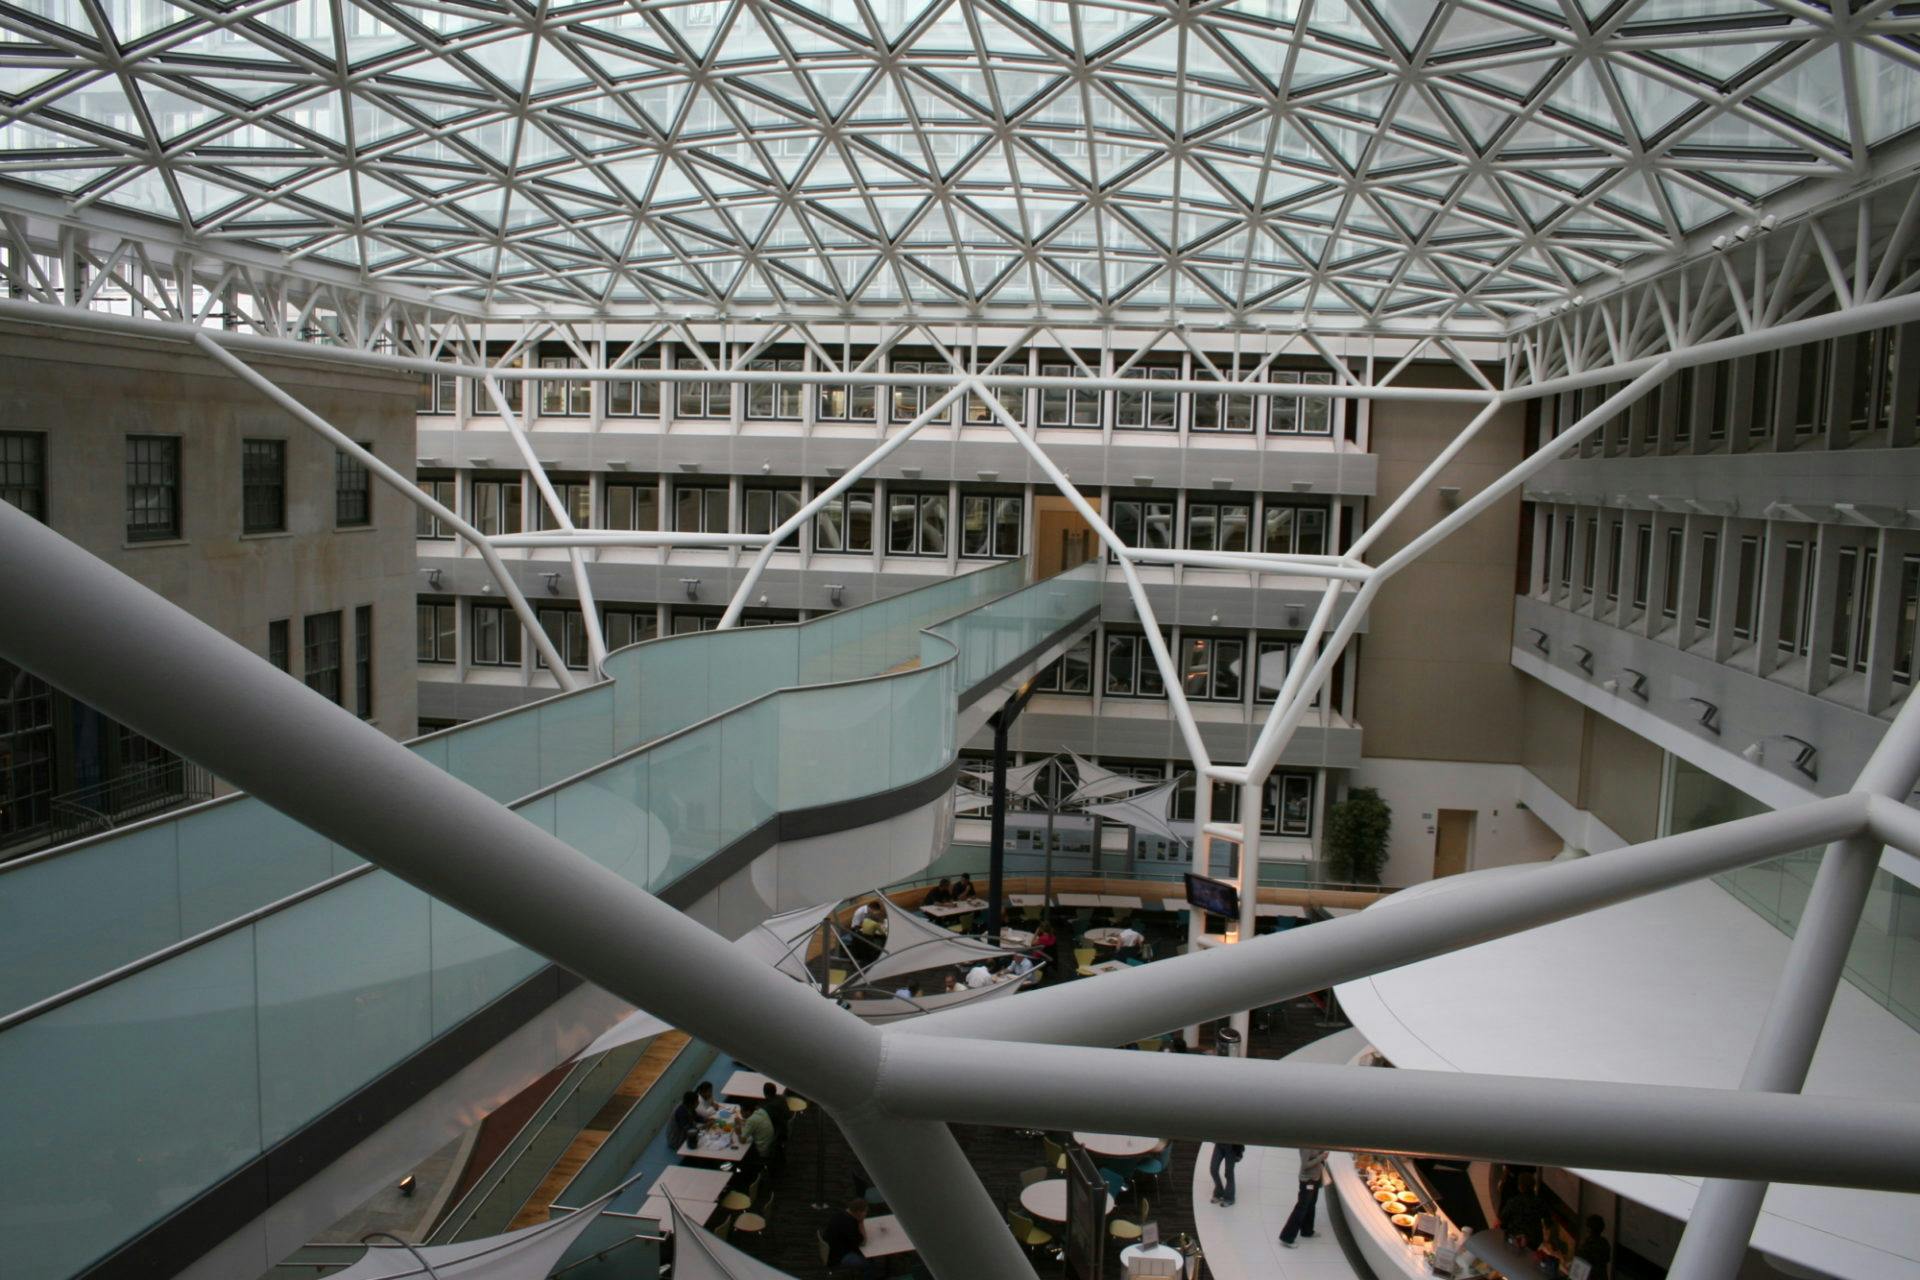 Interior of a modern building with a geometric glass ceiling, featuring multiple levels, a central café area, and intersecting white beams.